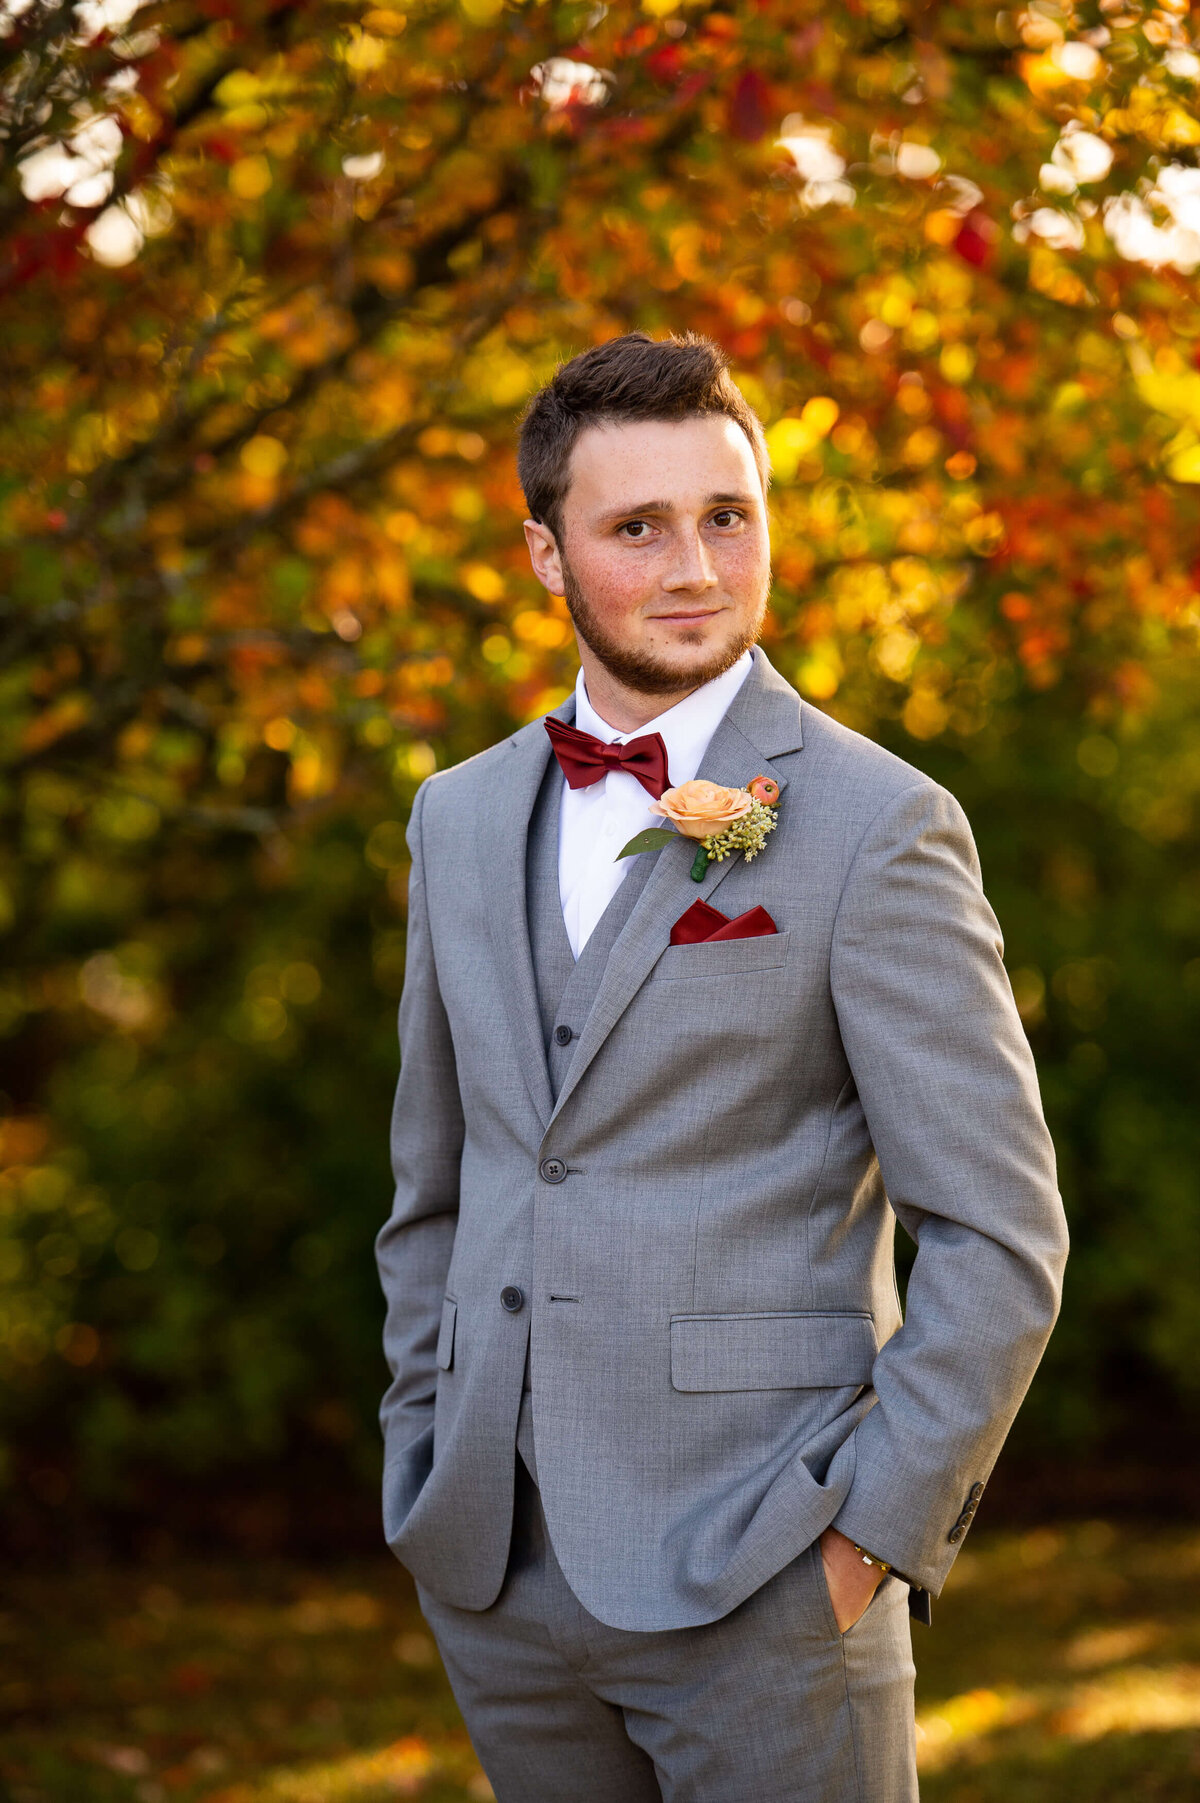 A handsome fall portrait of a groom in a grey suit taken outside in the fall at Strathmere wedding venue.  Captured by Ottawa wedding photographer JEMMAN Photography